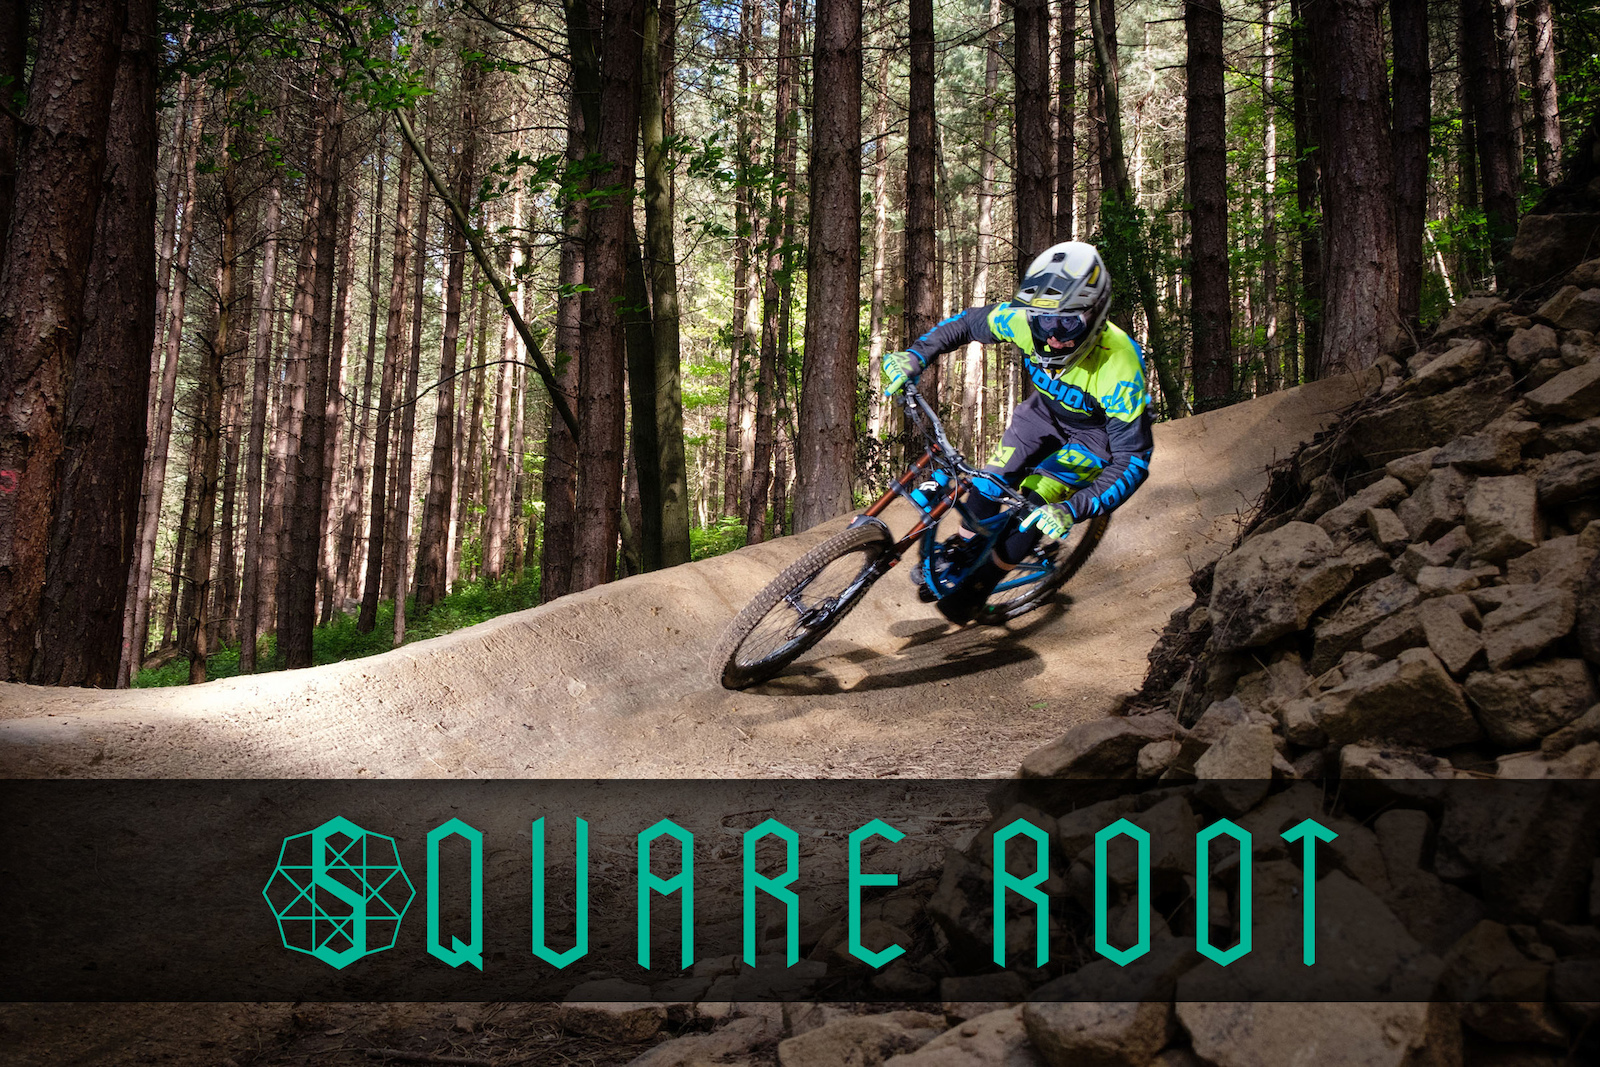 Real world testing the Square Root wheels on a berm in the UK.